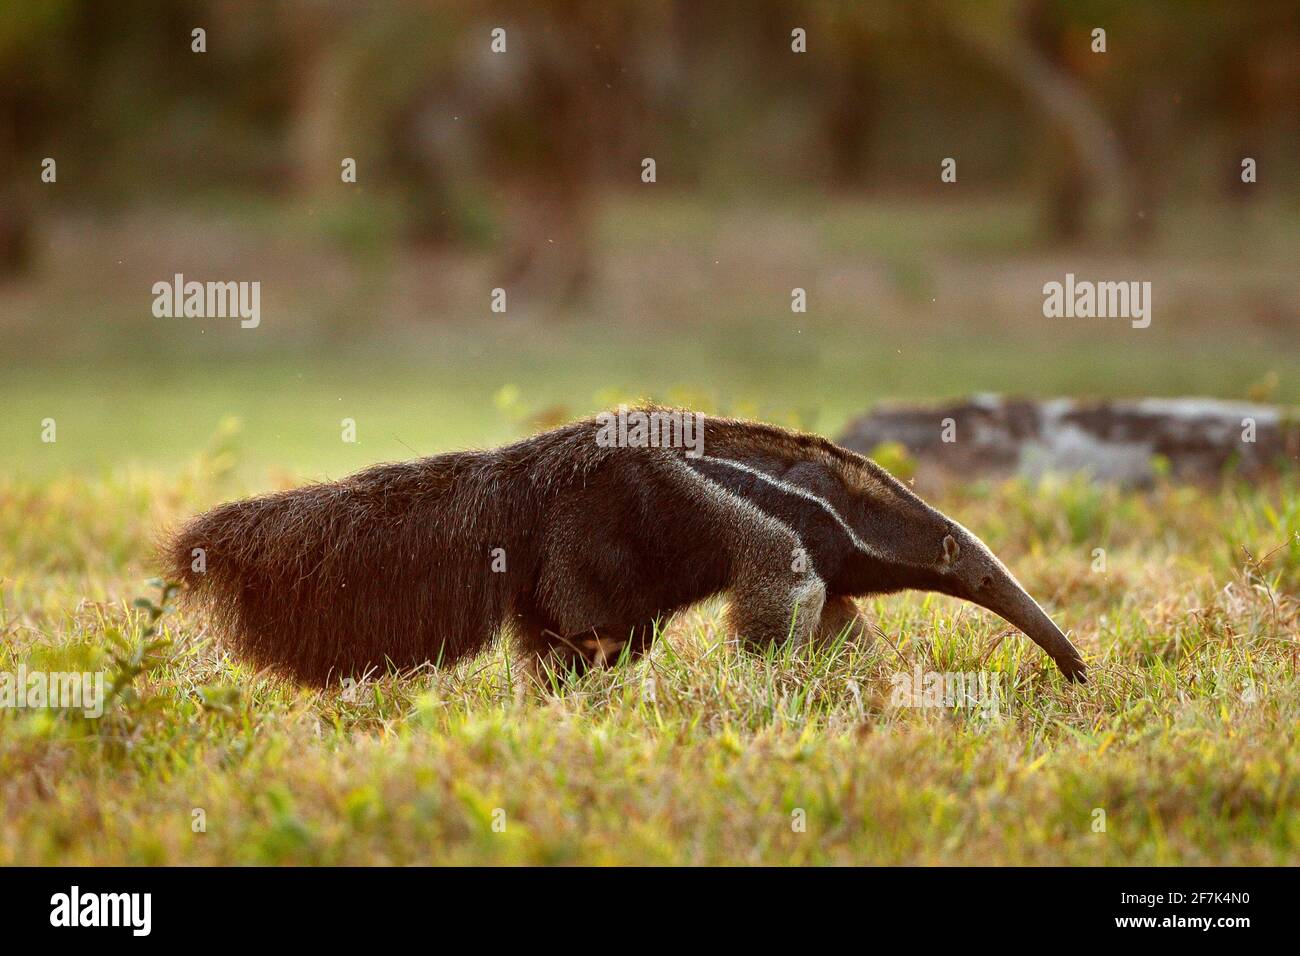 Anteater, cute animal from Brazil. Giant Anteater, Myrmecophaga tridactyla, animal with long tail and log muzzle nose, Pantanal, Brazil. Wildlife scen Stock Photo